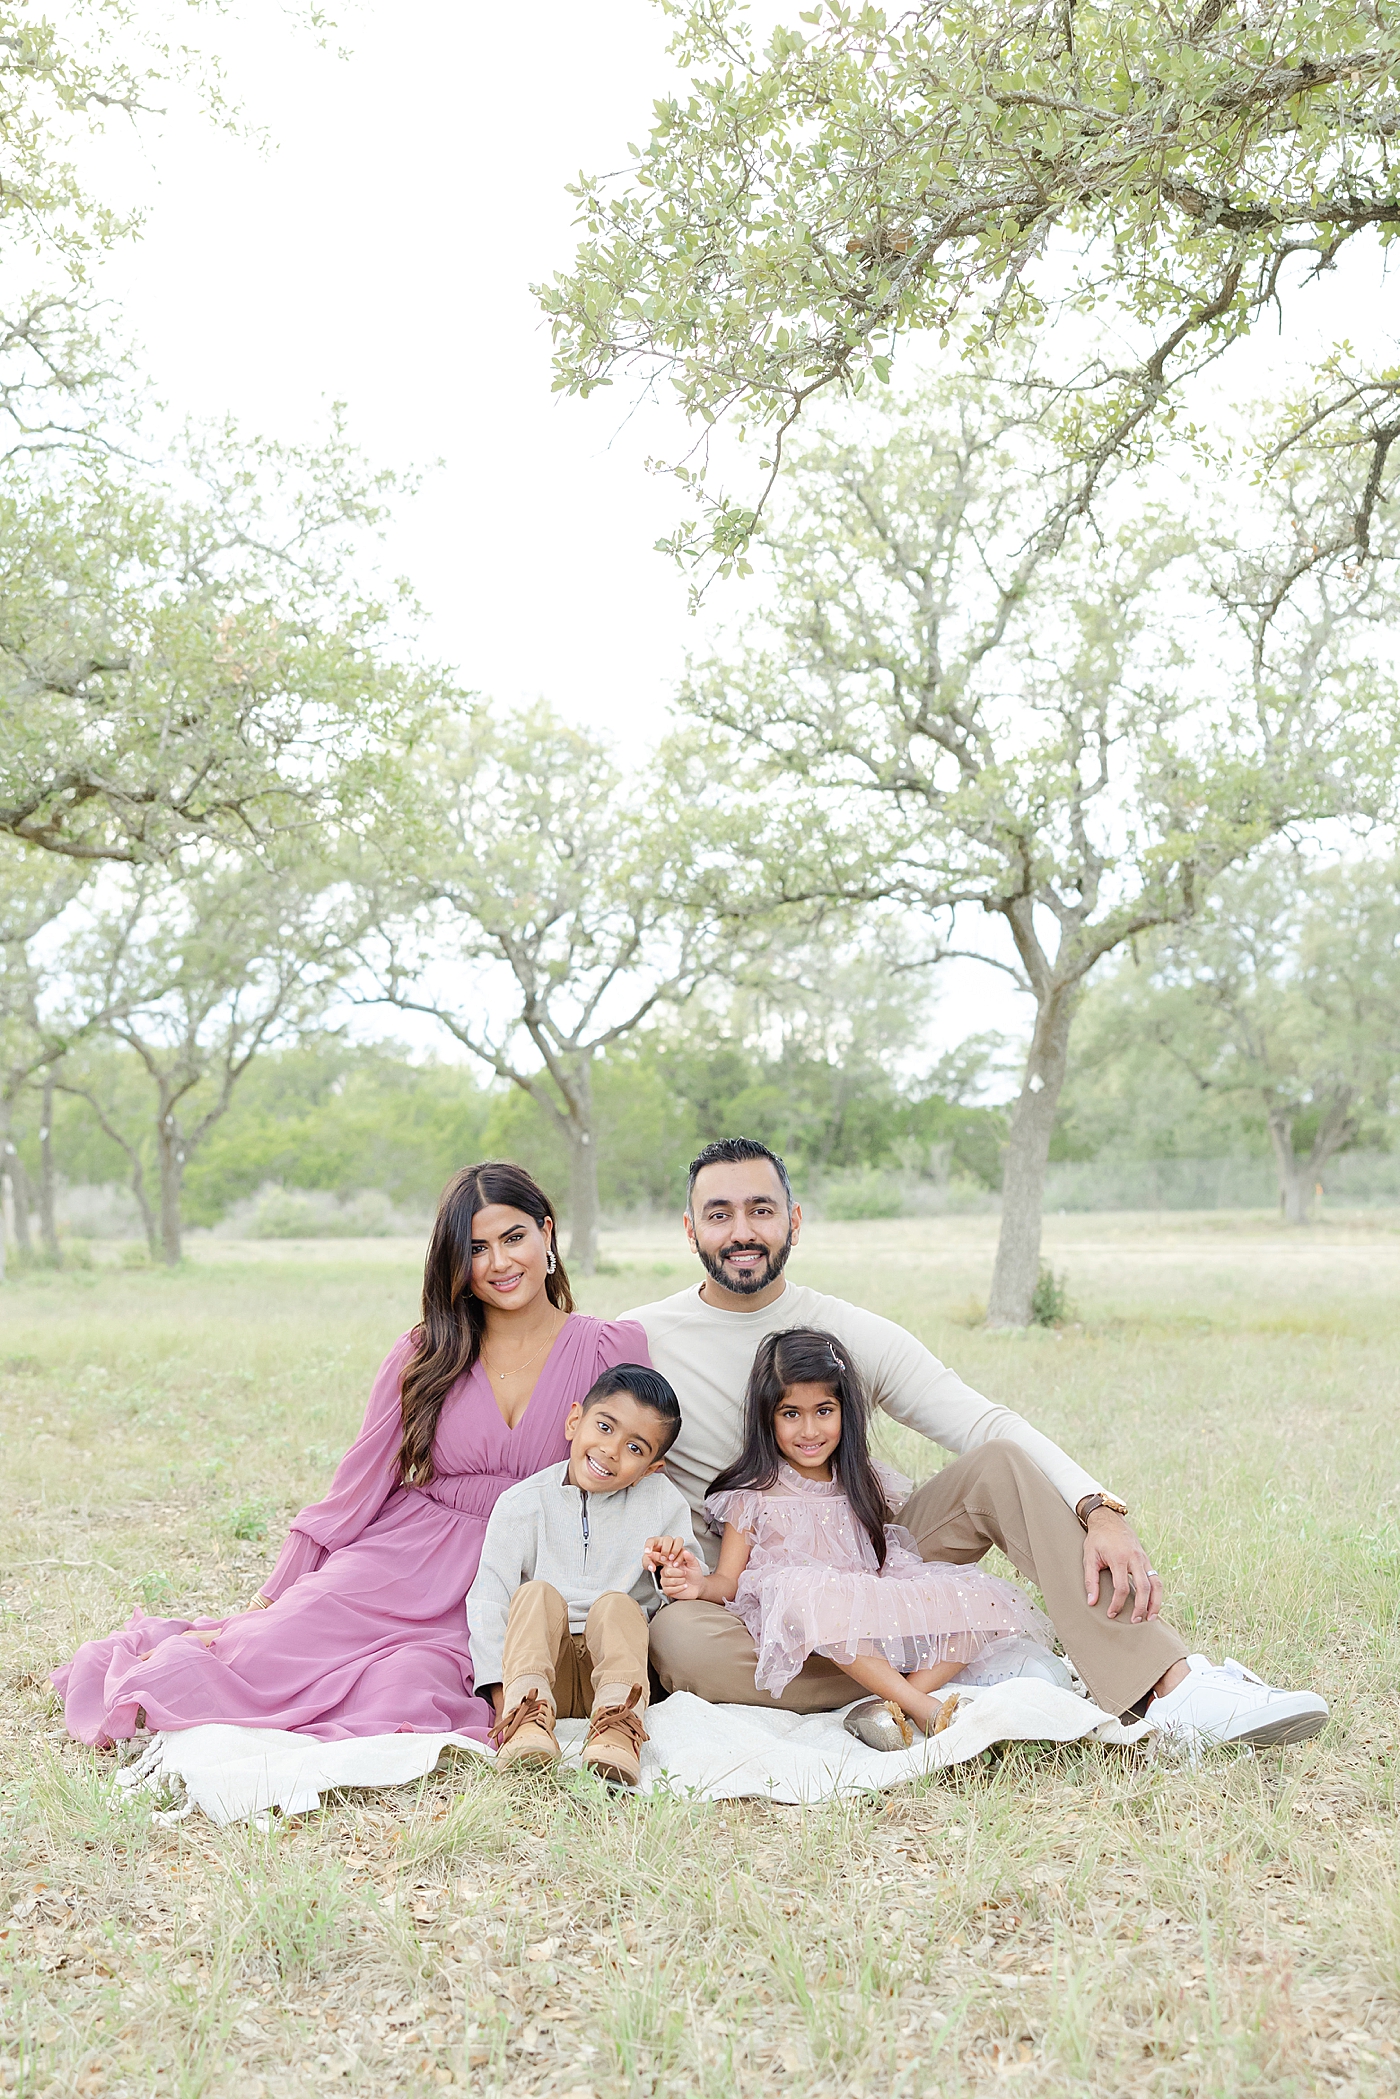 Family sitting on a blanket in the park | Image by Sana Ahmed Photography